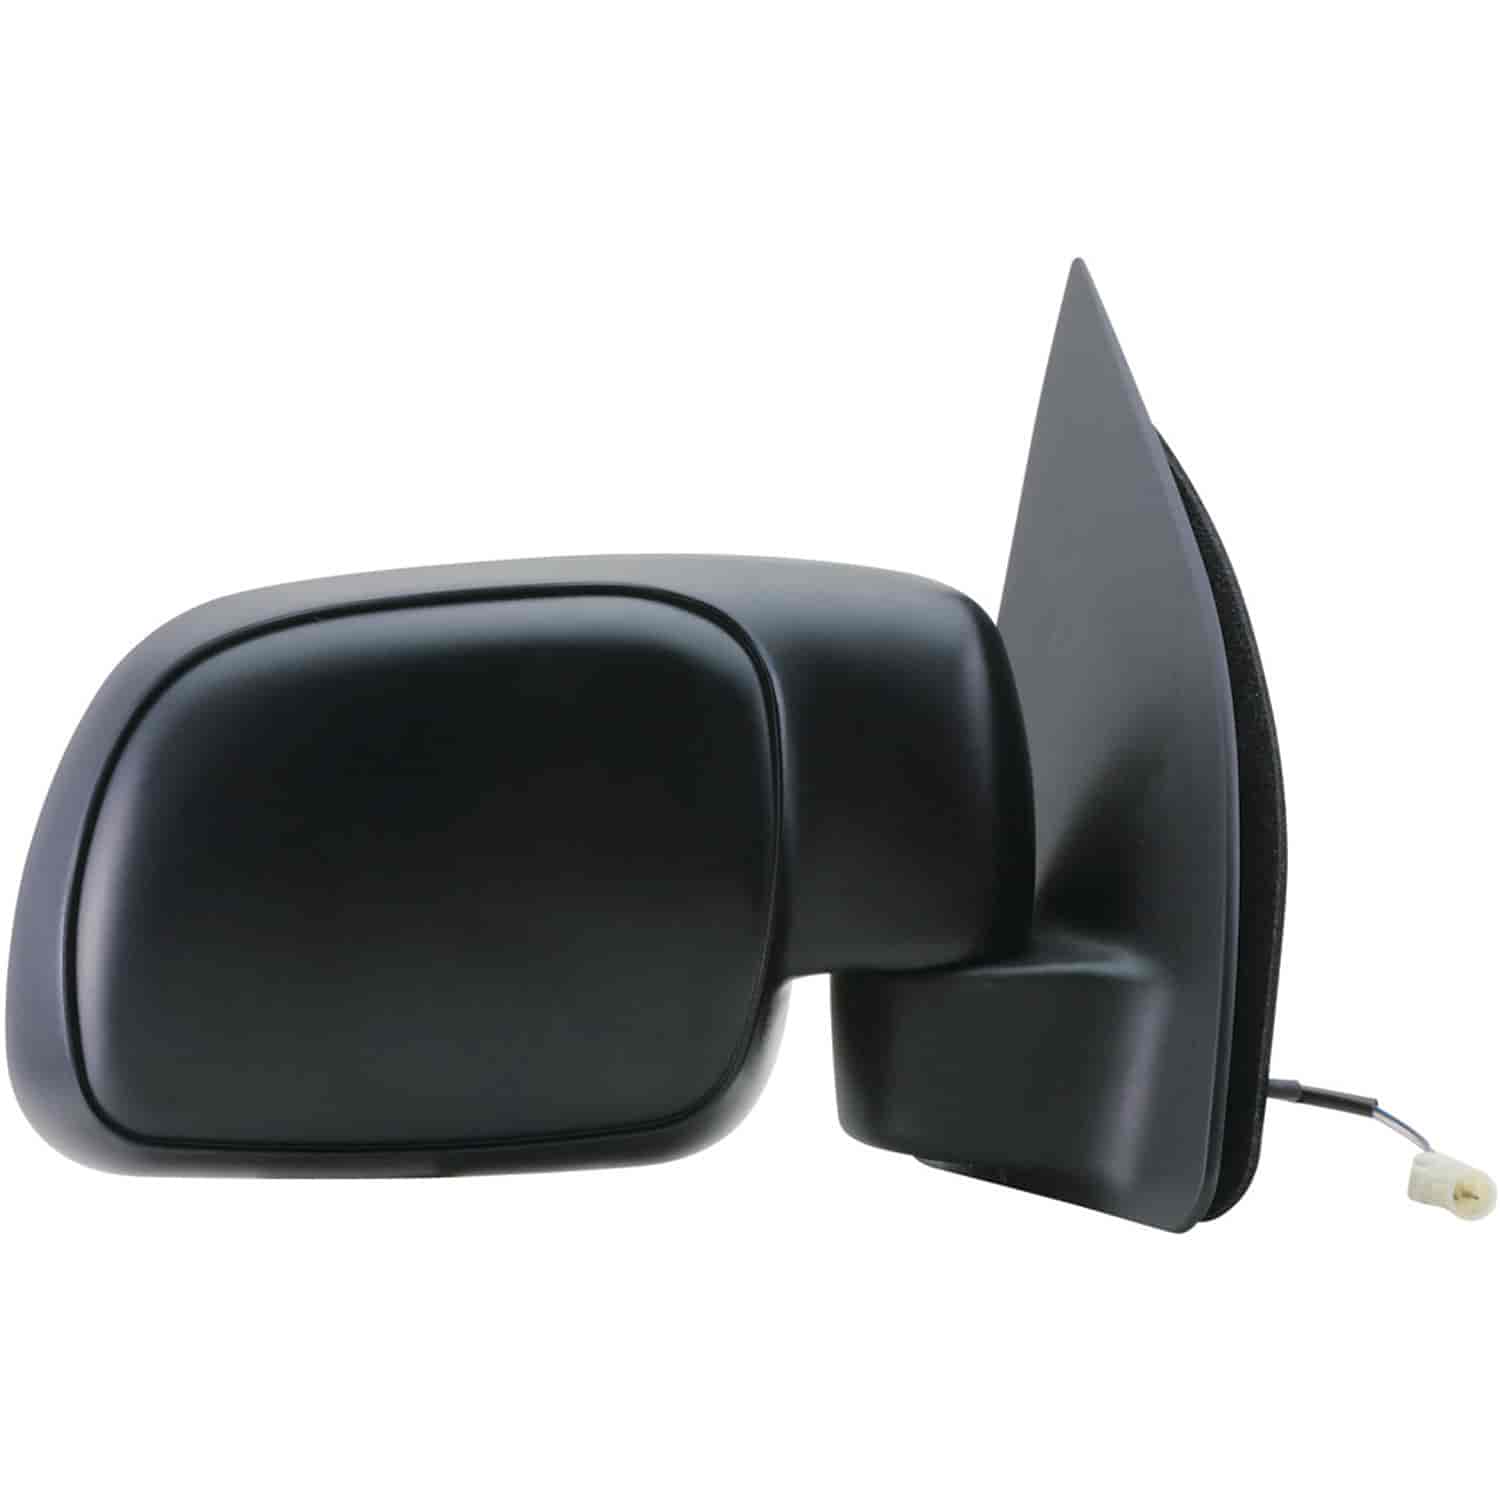 OEM Style Replacement Mirror Fits 1999 to 2000 Ford F-Series Super Duty